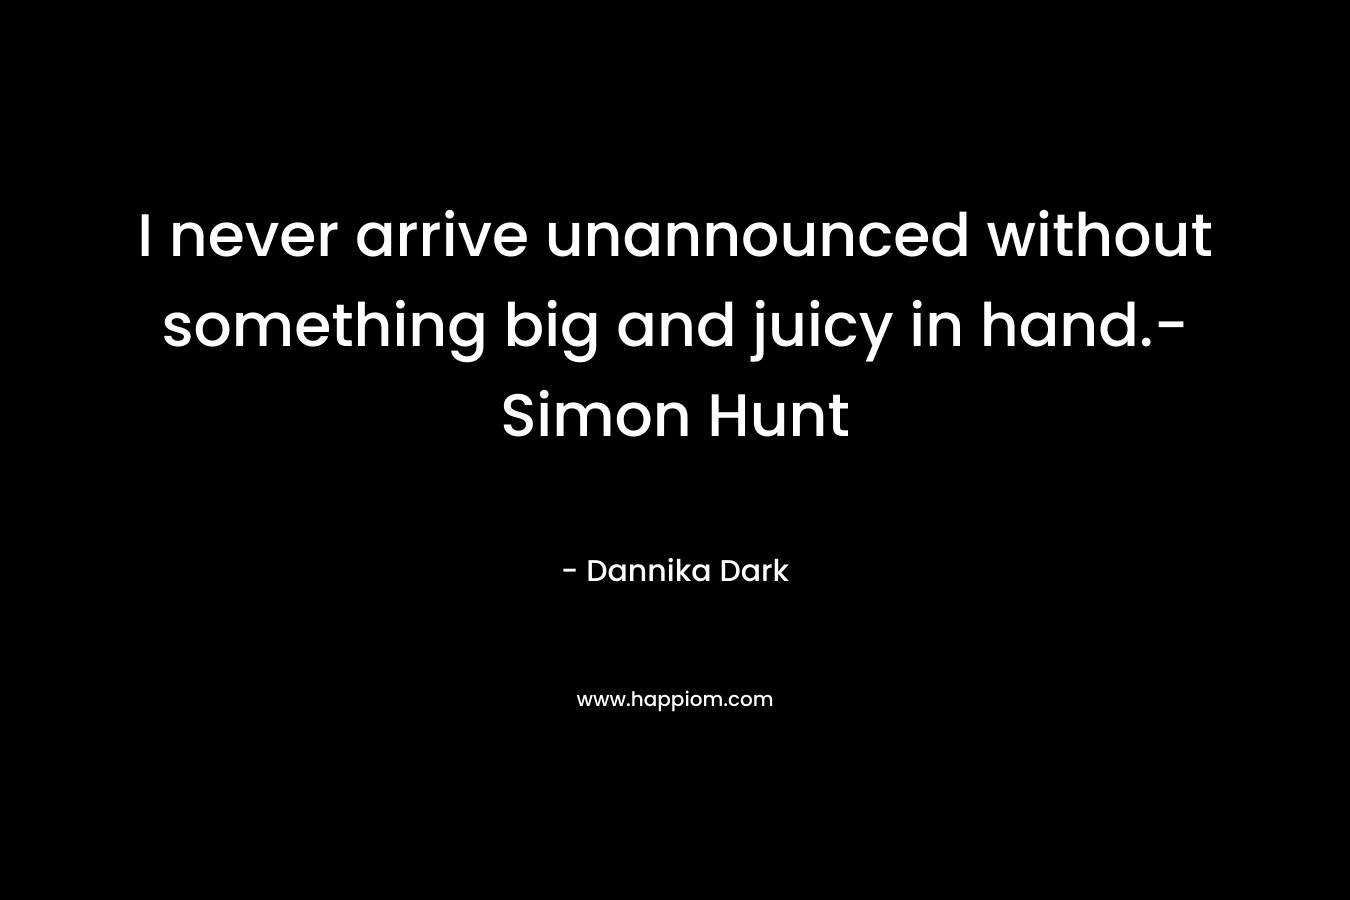 I never arrive unannounced without something big and juicy in hand.- Simon Hunt